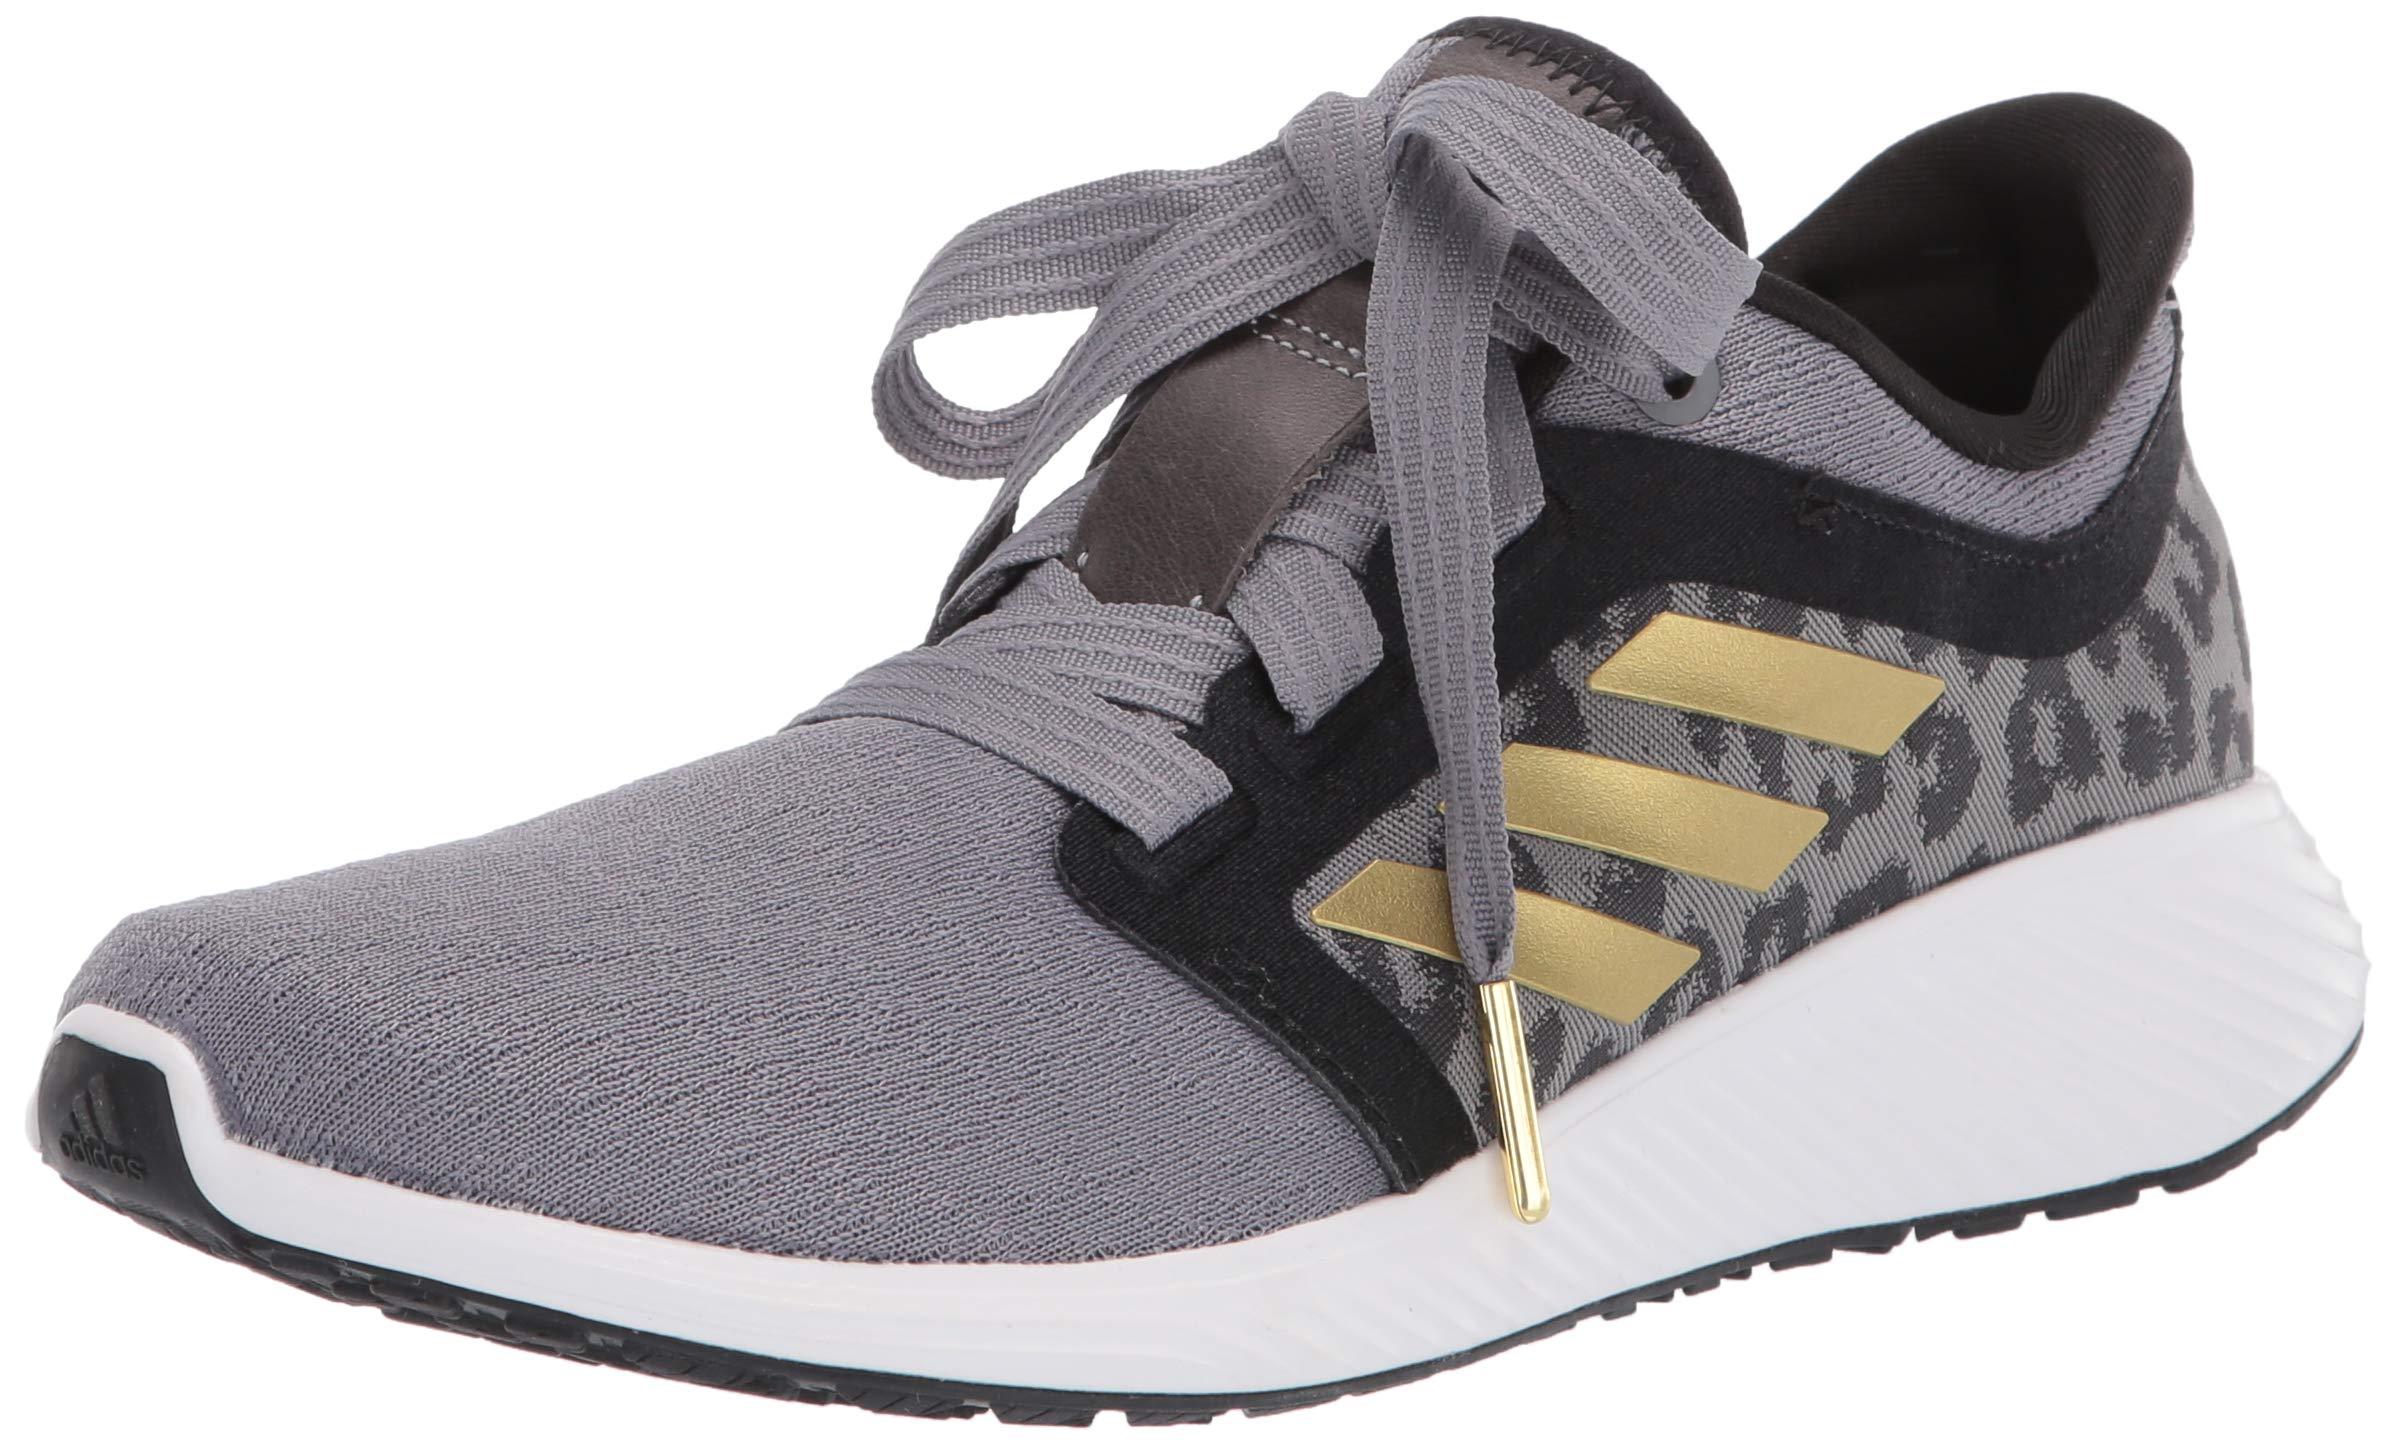 Adidas Edge Lux Running Shoe In Gray Lyst | lupon.gov.ph